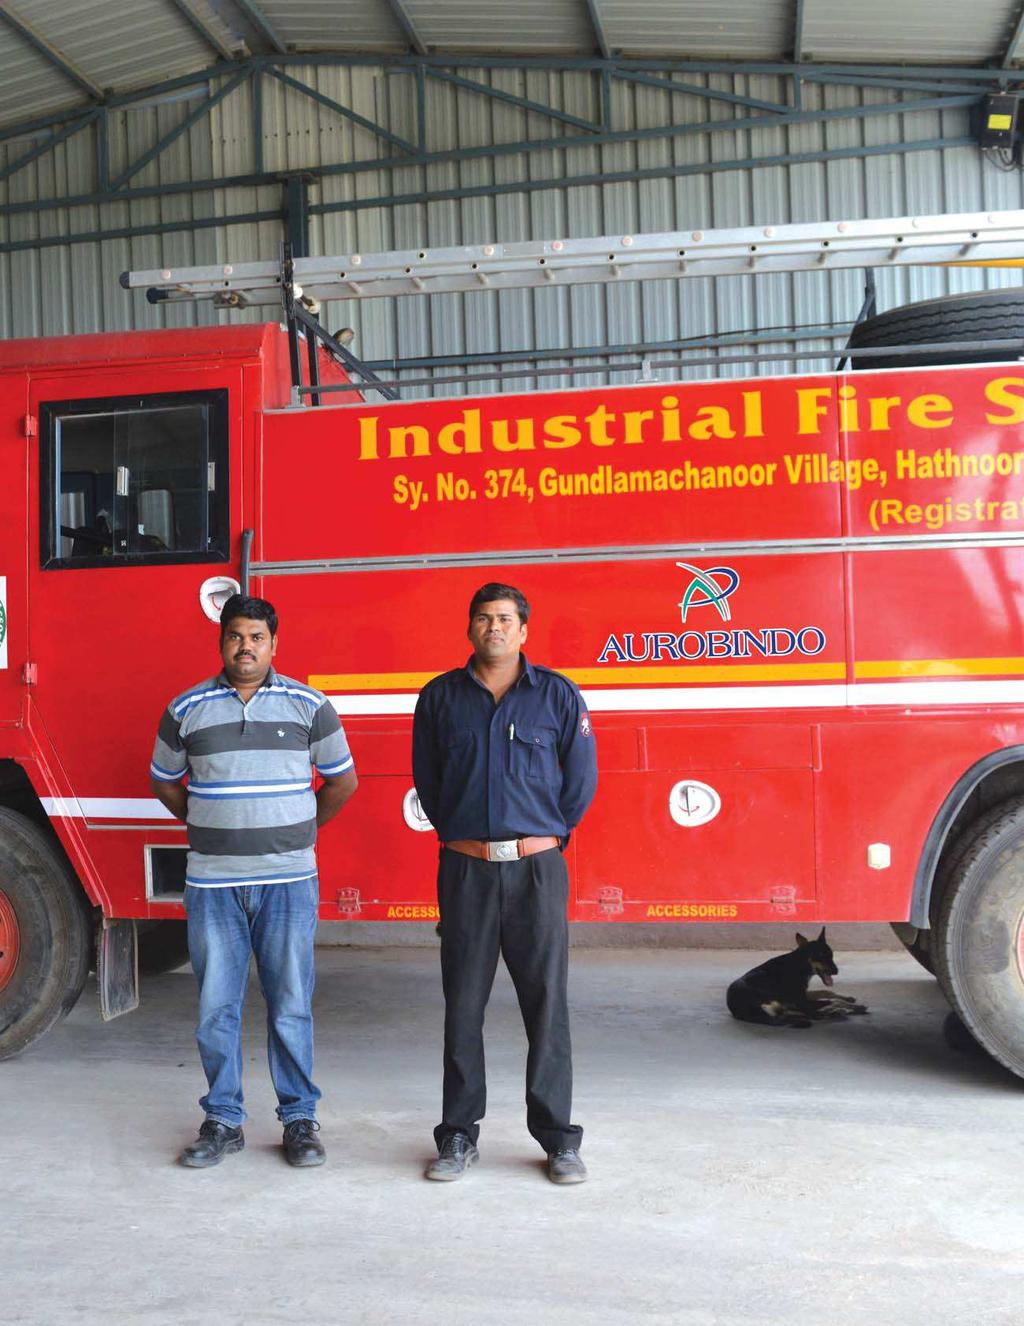 Fire station established by Aurobindopharma in our area has been very helpful in controlling fire